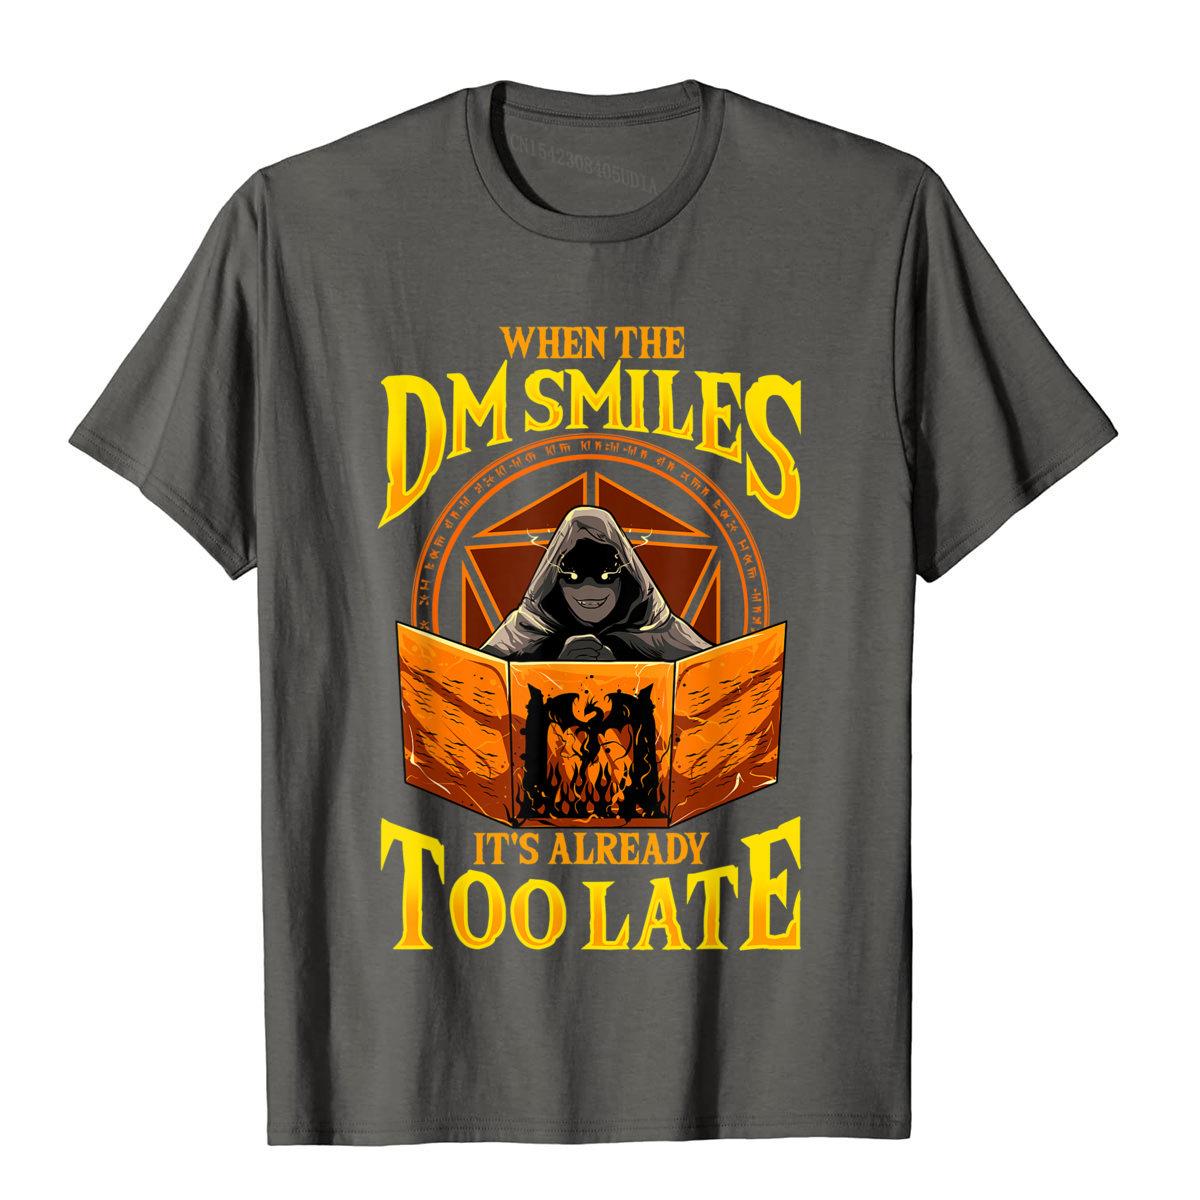 When The DM Smiles It's Already Too Late T-Shirt